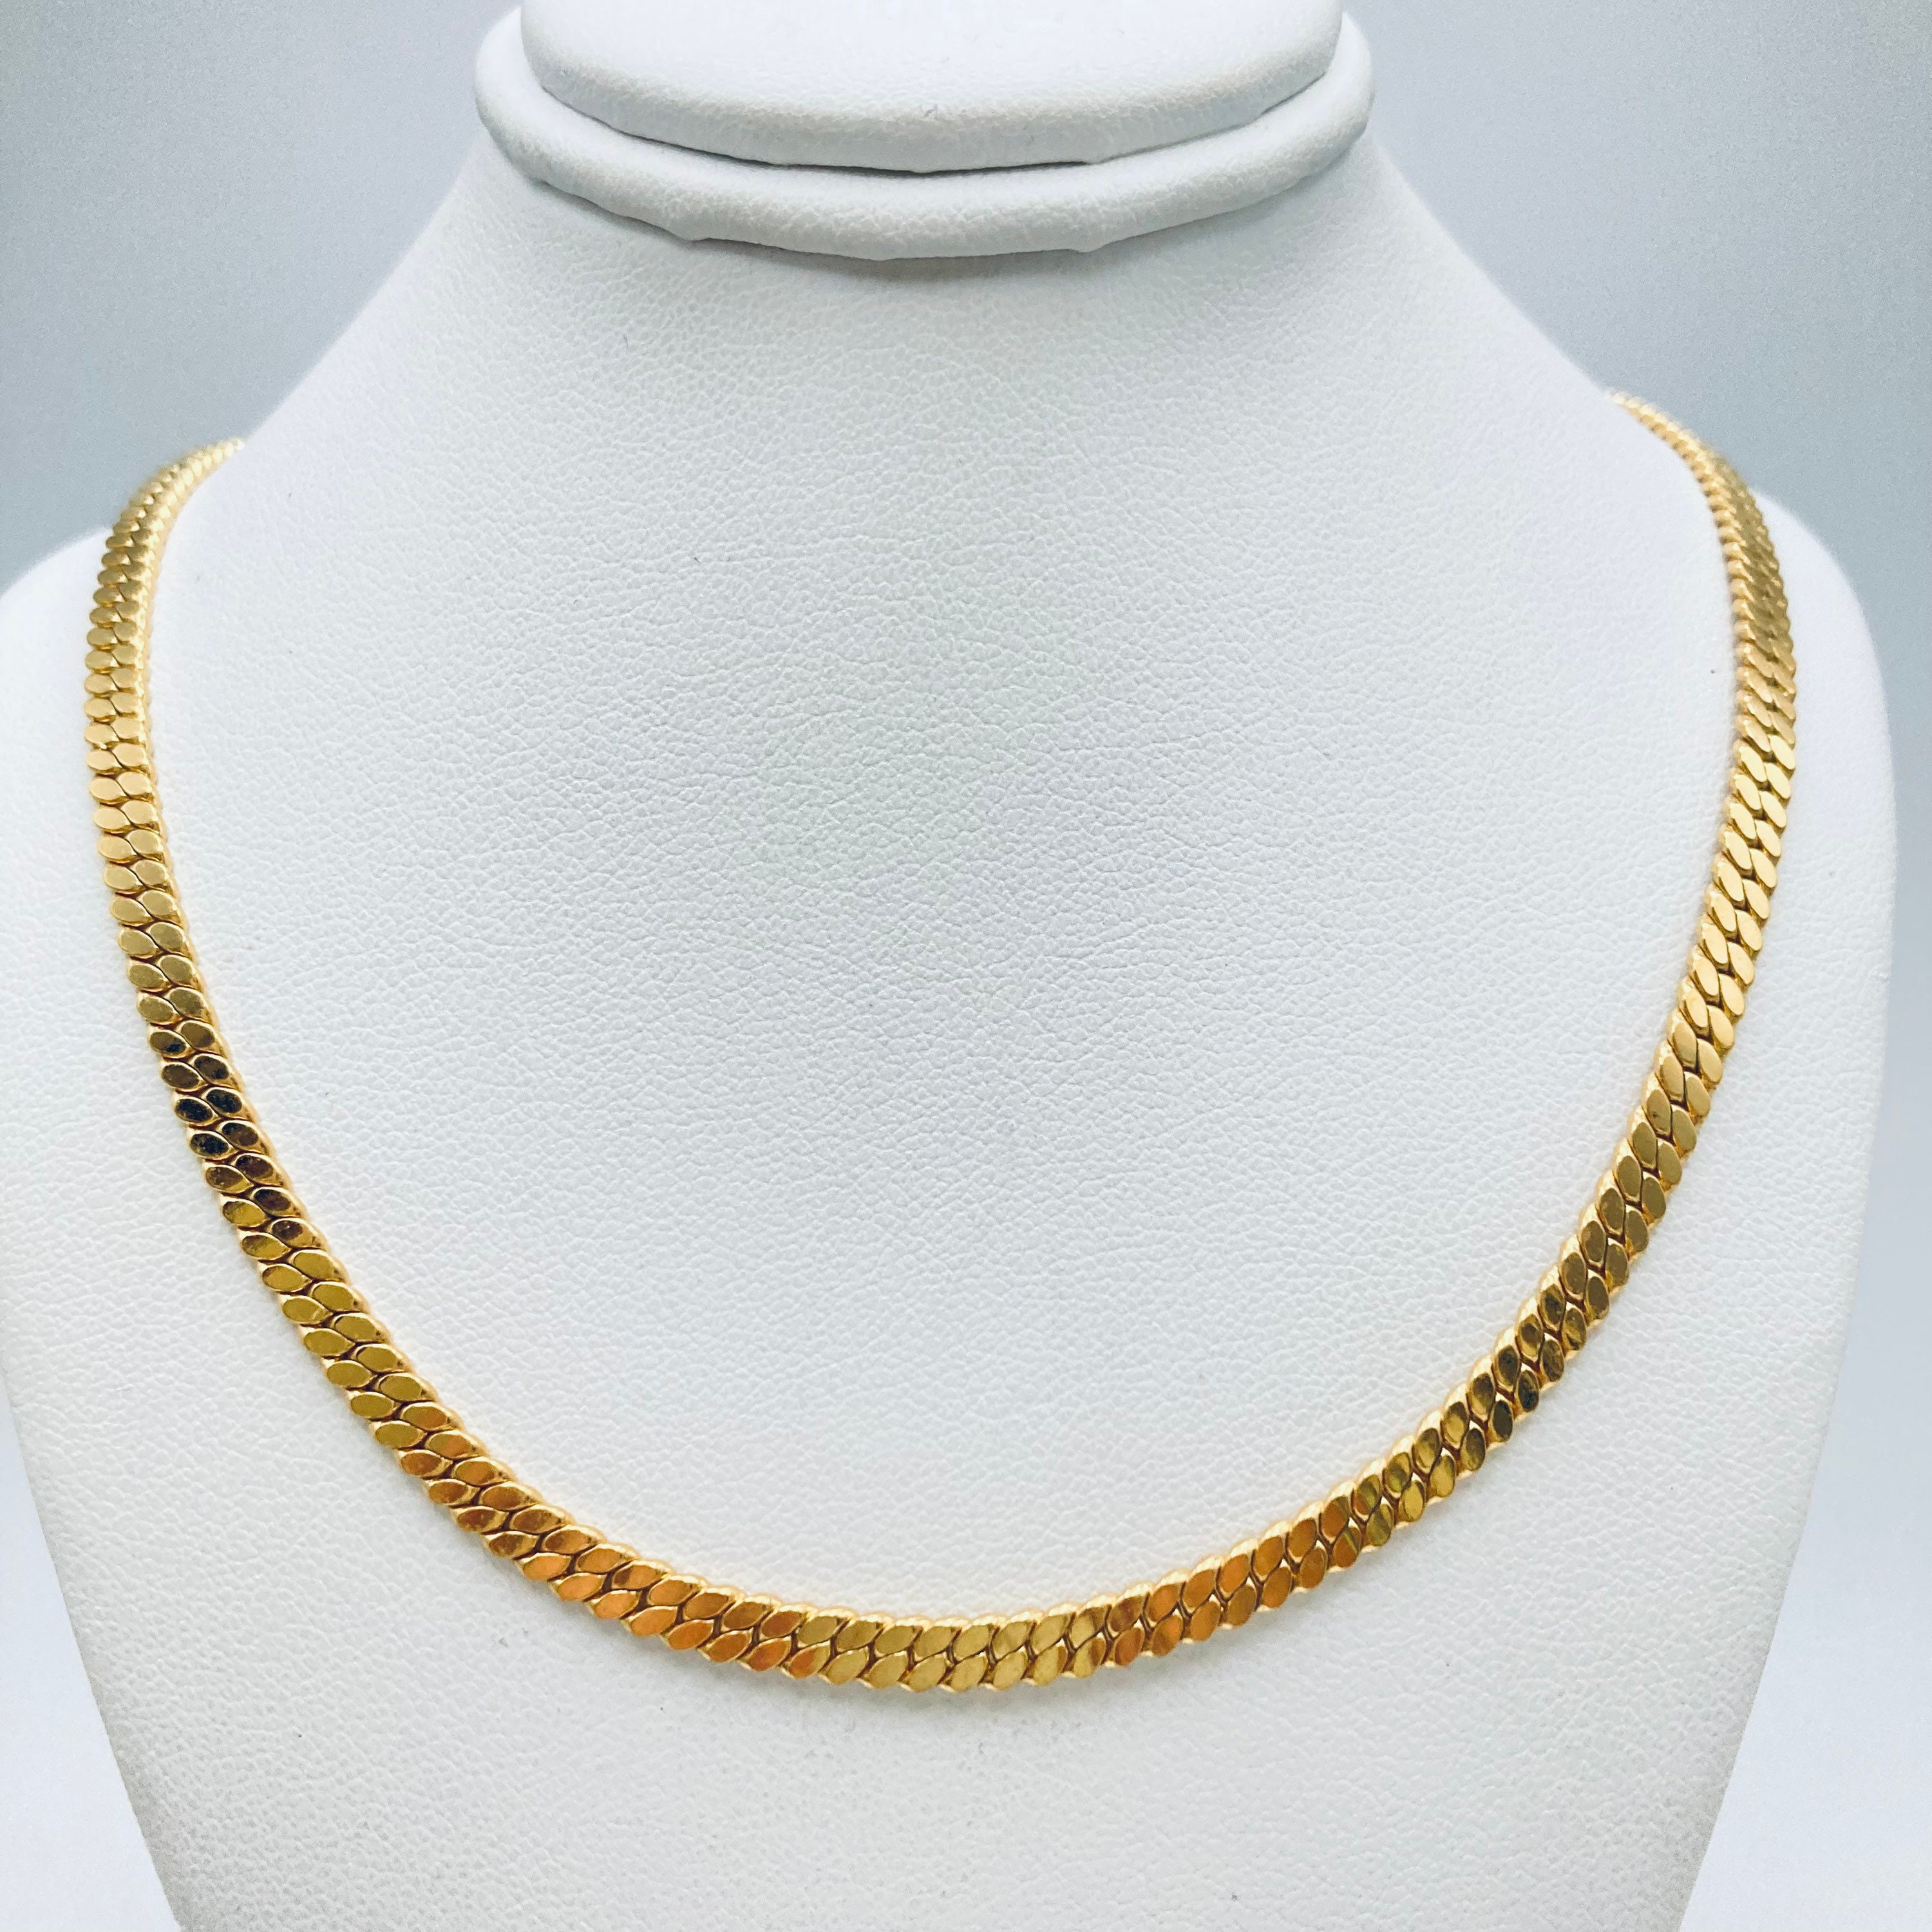 Vintage Korea Twisted Gold Chain Necklace - Etsy | Gold chain design, Gold  chains for men, Gold earrings designs